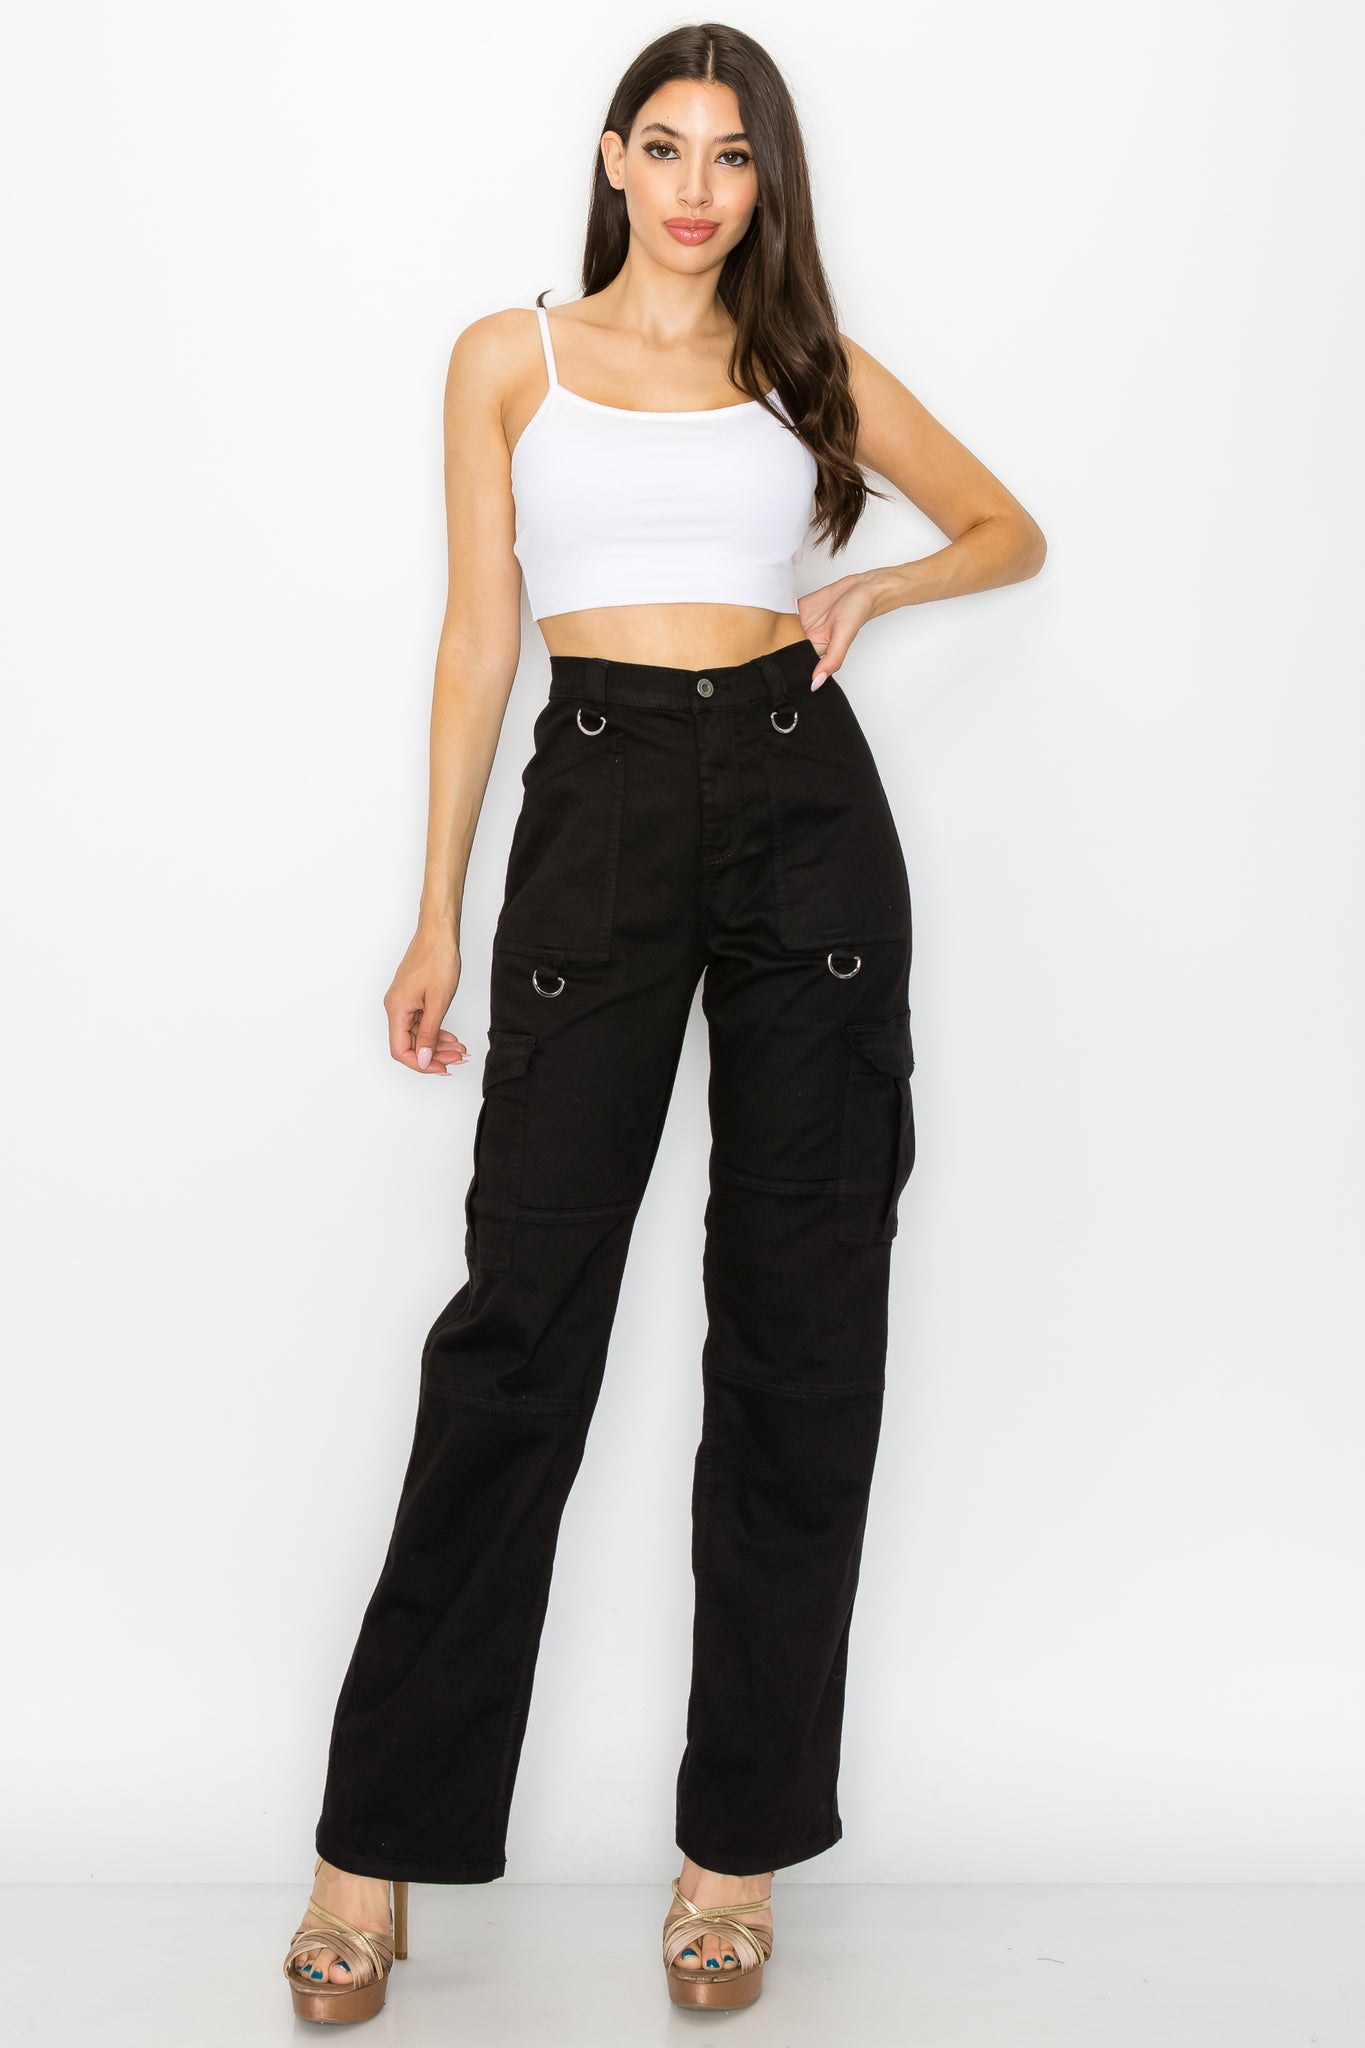 High Waisted Black Cargo Pants Top Sellers - www.azc.com.co 1692407743